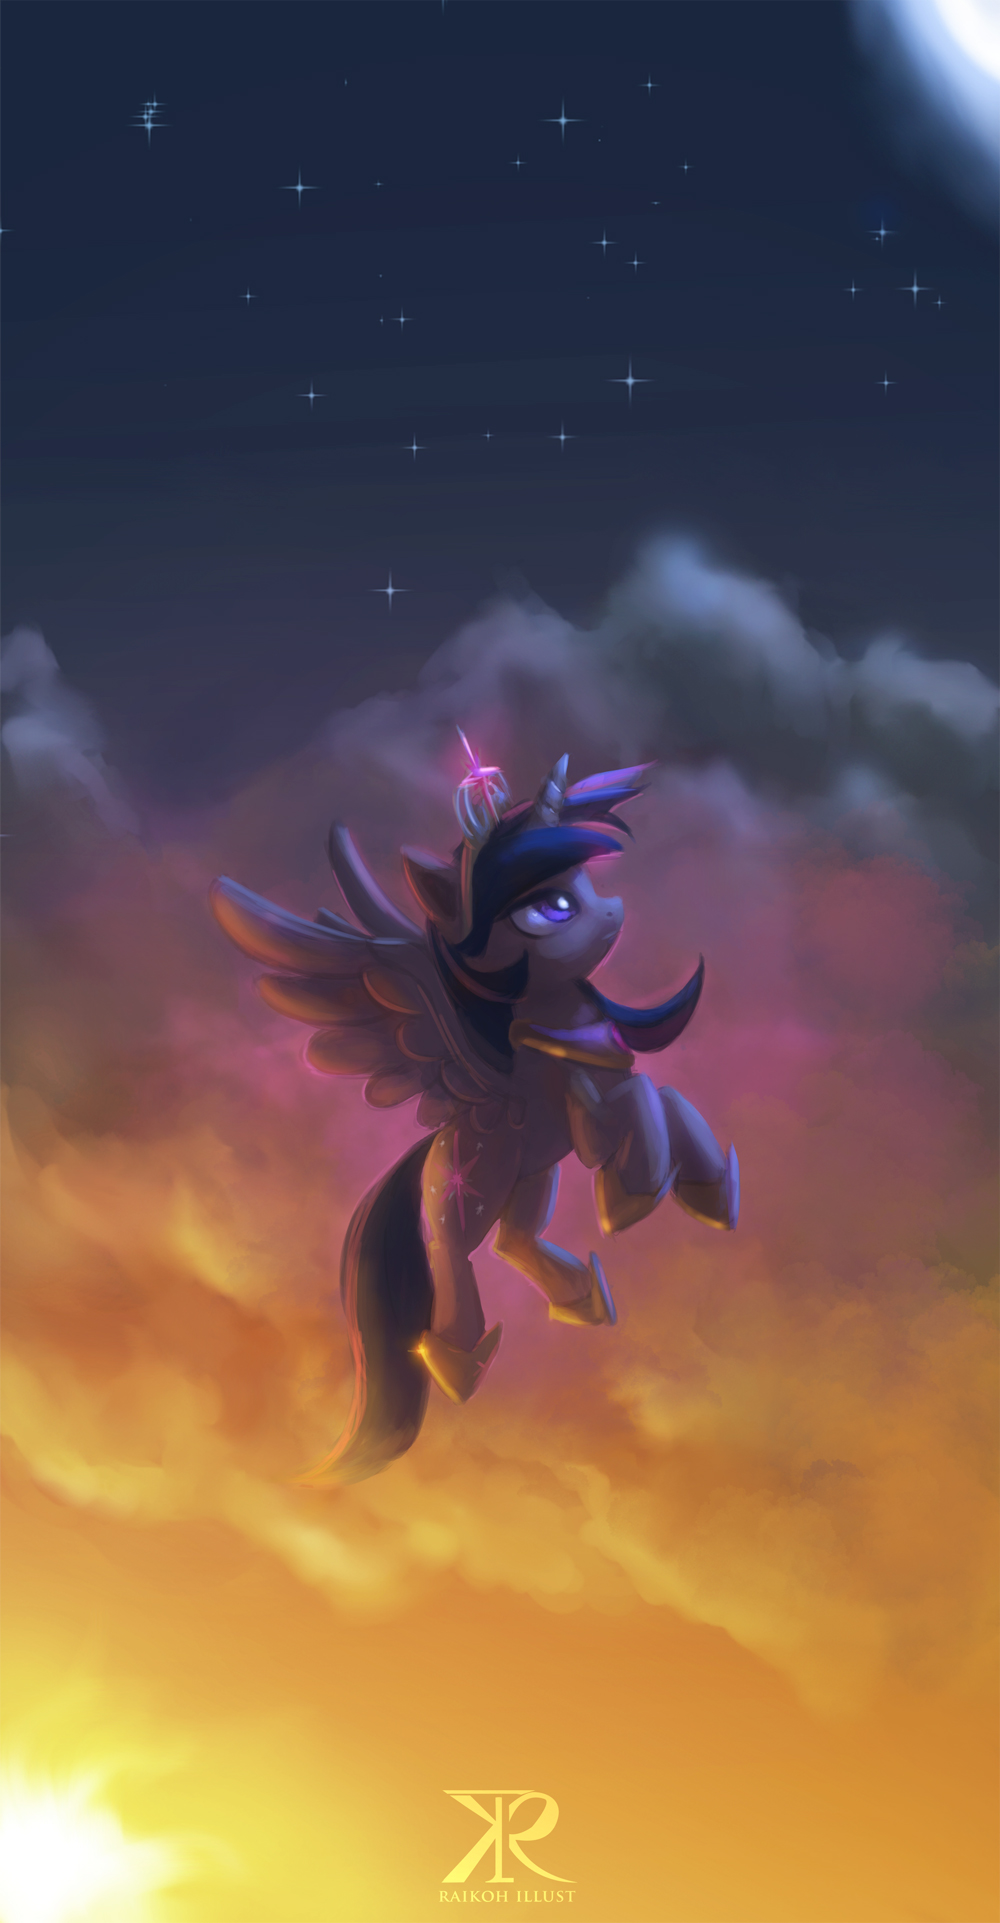 Twilight- The Princess between Day and Night.